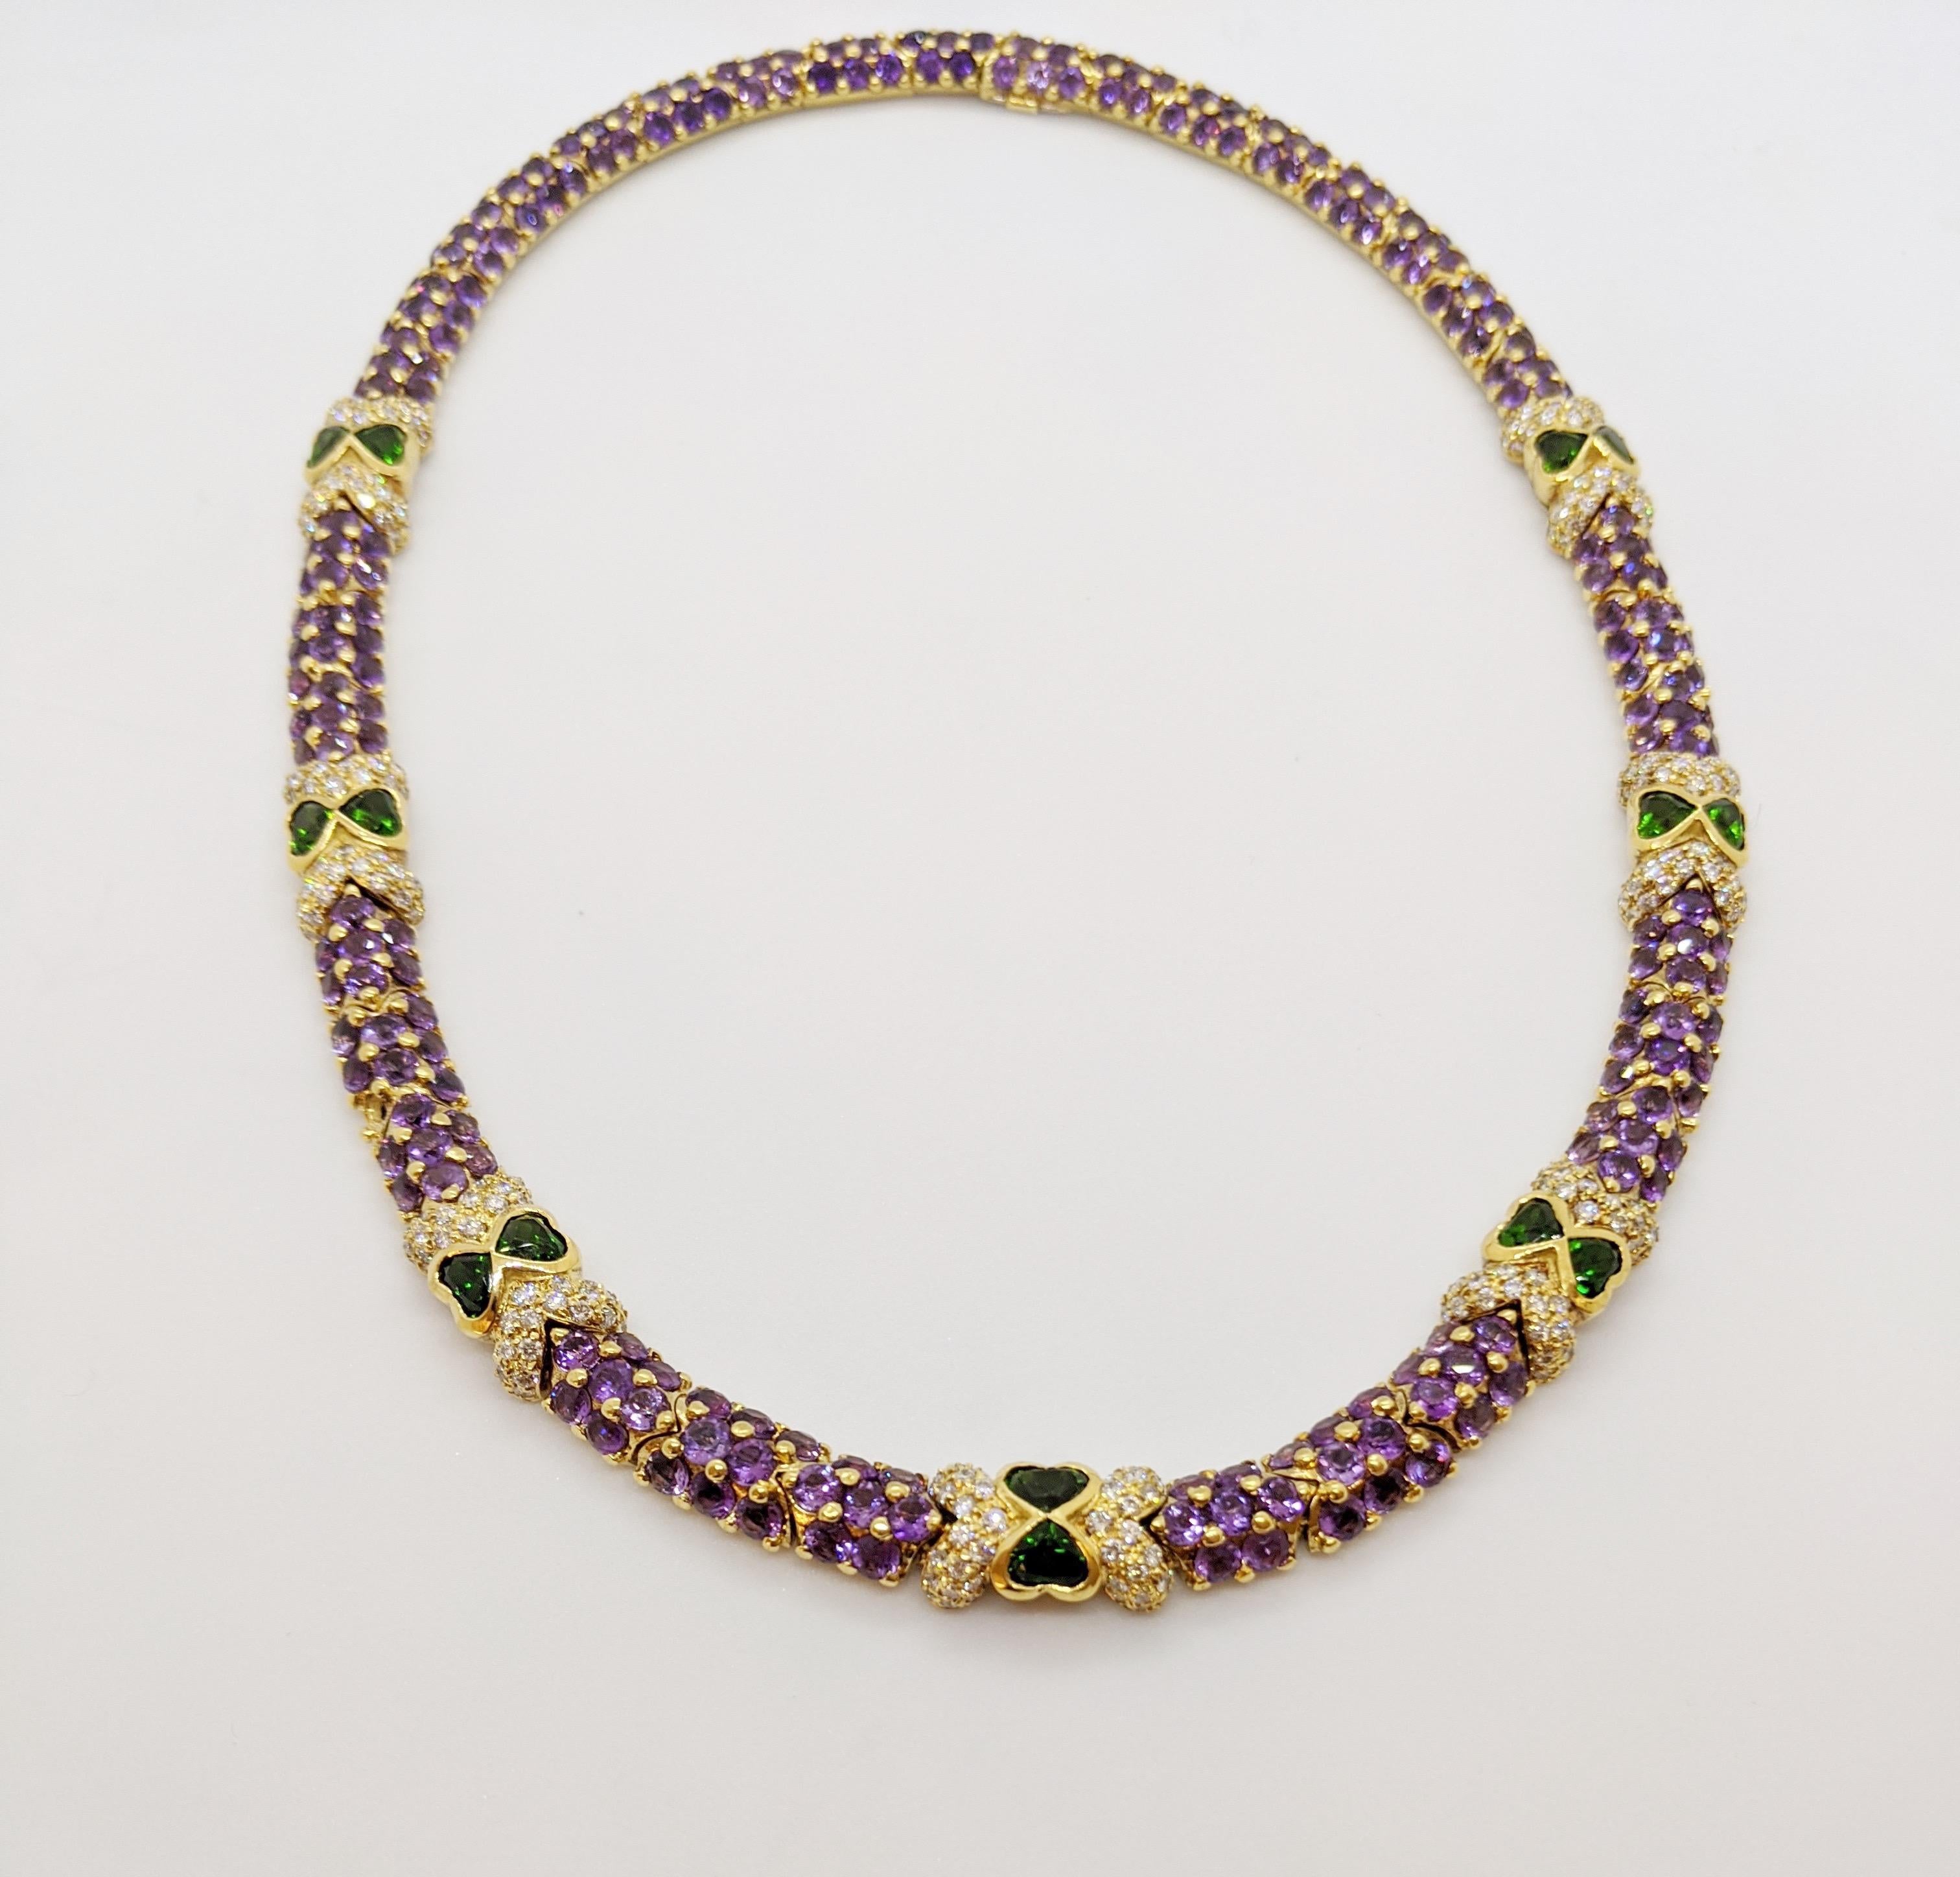 This necklace was designed by G. Verdi of Italy. The round brilliant cut Amethyst stones are set in 18 karat  yellow gold  links with prongs that give a beautiful beaded effect. Round brilliant Diamonds along with 14 heart shaped Tsavorites join the